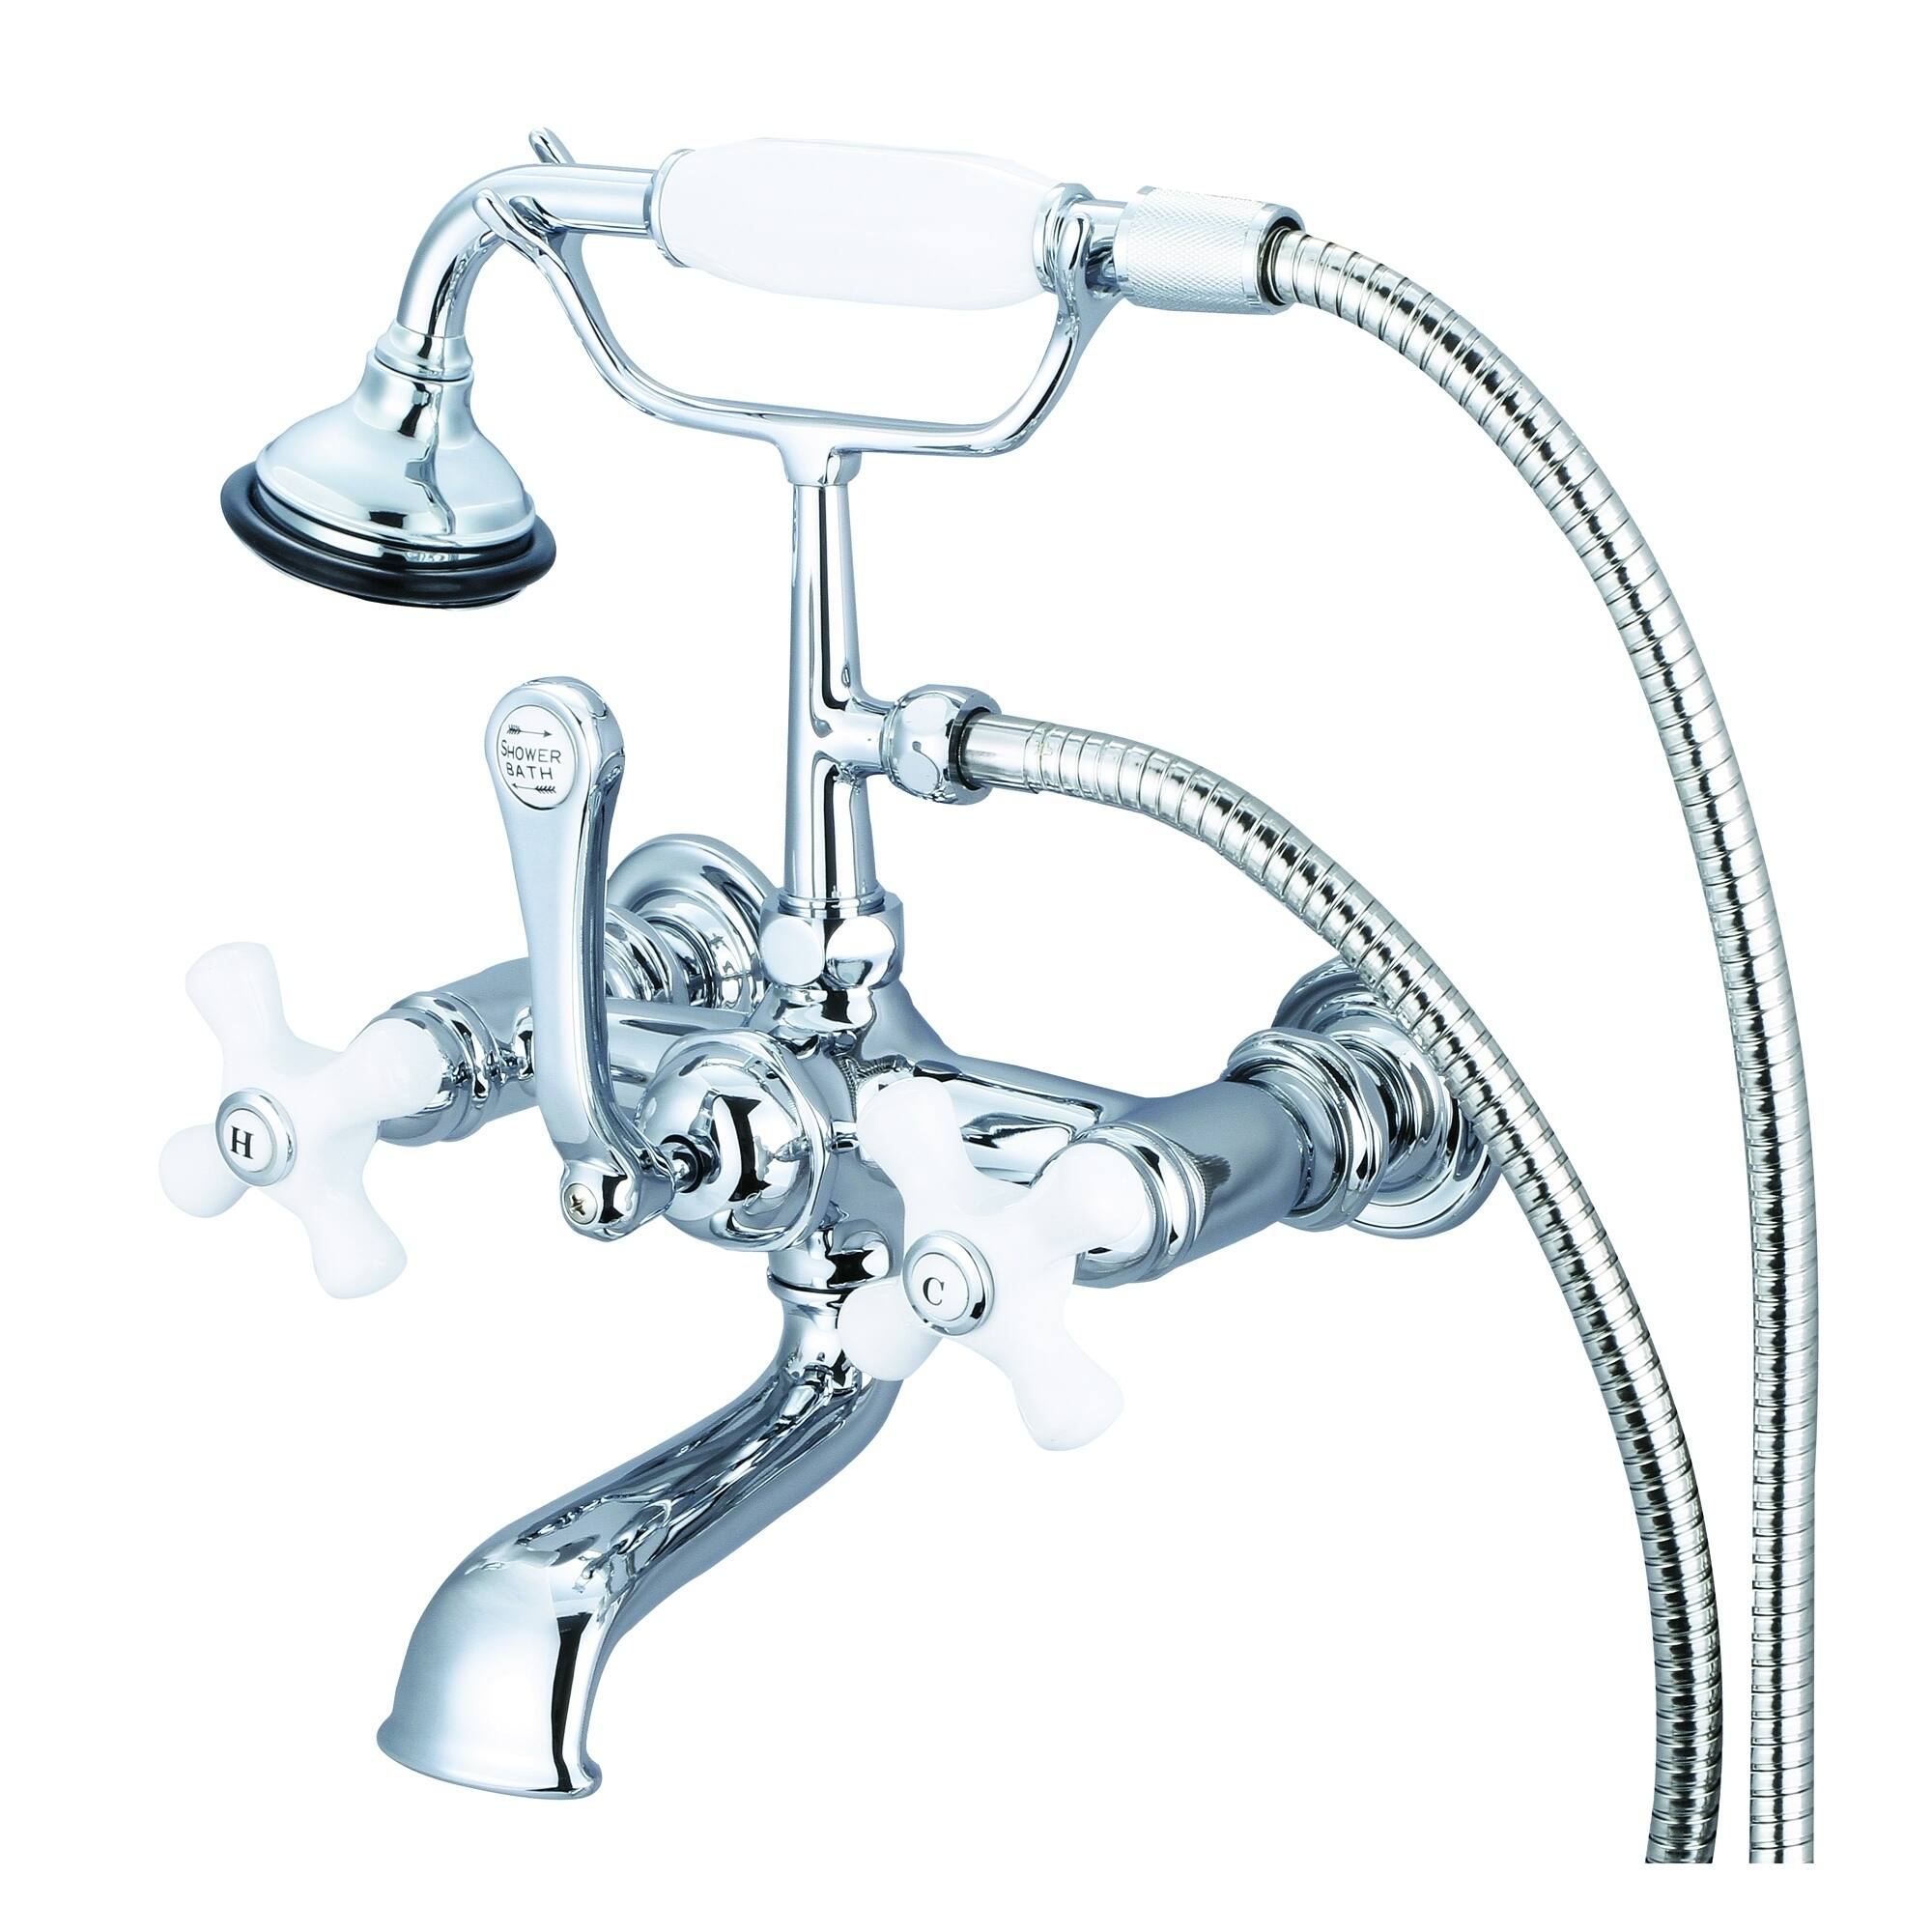 Vintage Classic 7 Inch Spread Wall Mount Tub Faucet with Straight Wall Connector & Handheld Shower in Chrome Finish - labeled porcelain cross handles